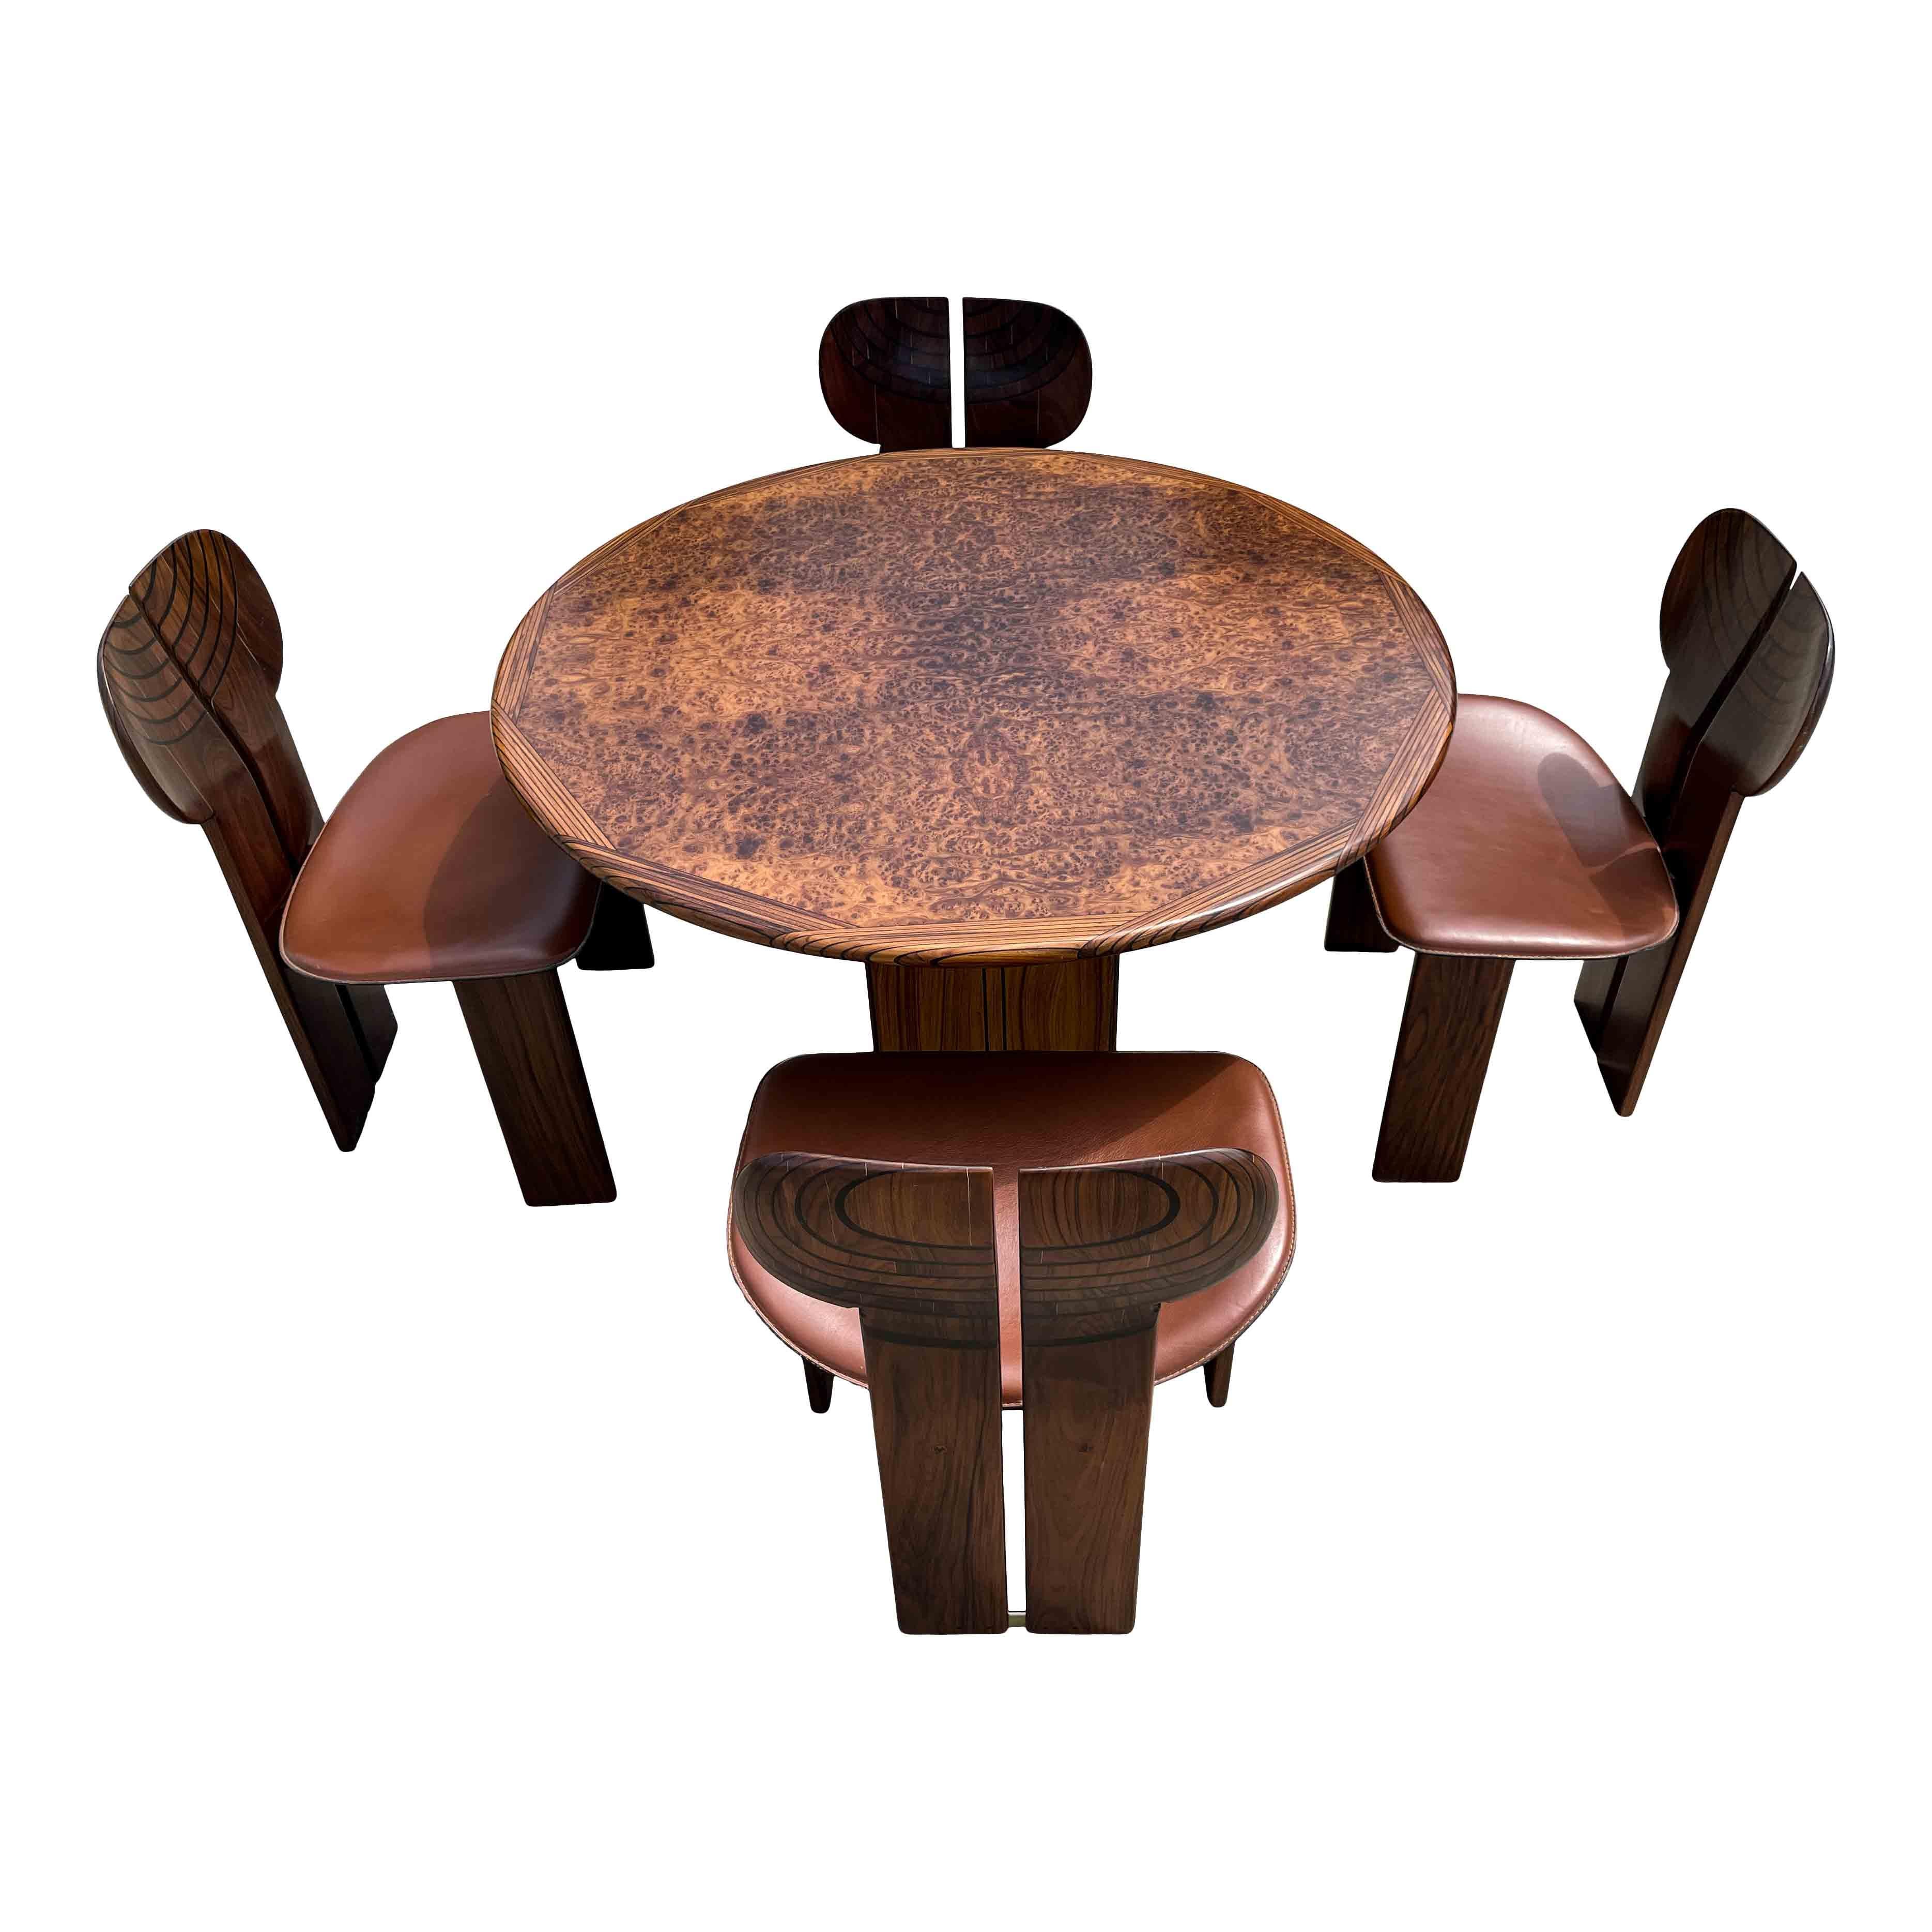 A dining set composed of four “Africa” dining chairs and an “Artona” table, designed by Afra and Tobia Scarpa for Maxalto in 1975.

Made of walnut, burl, and ebony.

Originally hand-finished and assembled one by one, “Africa” presents a support